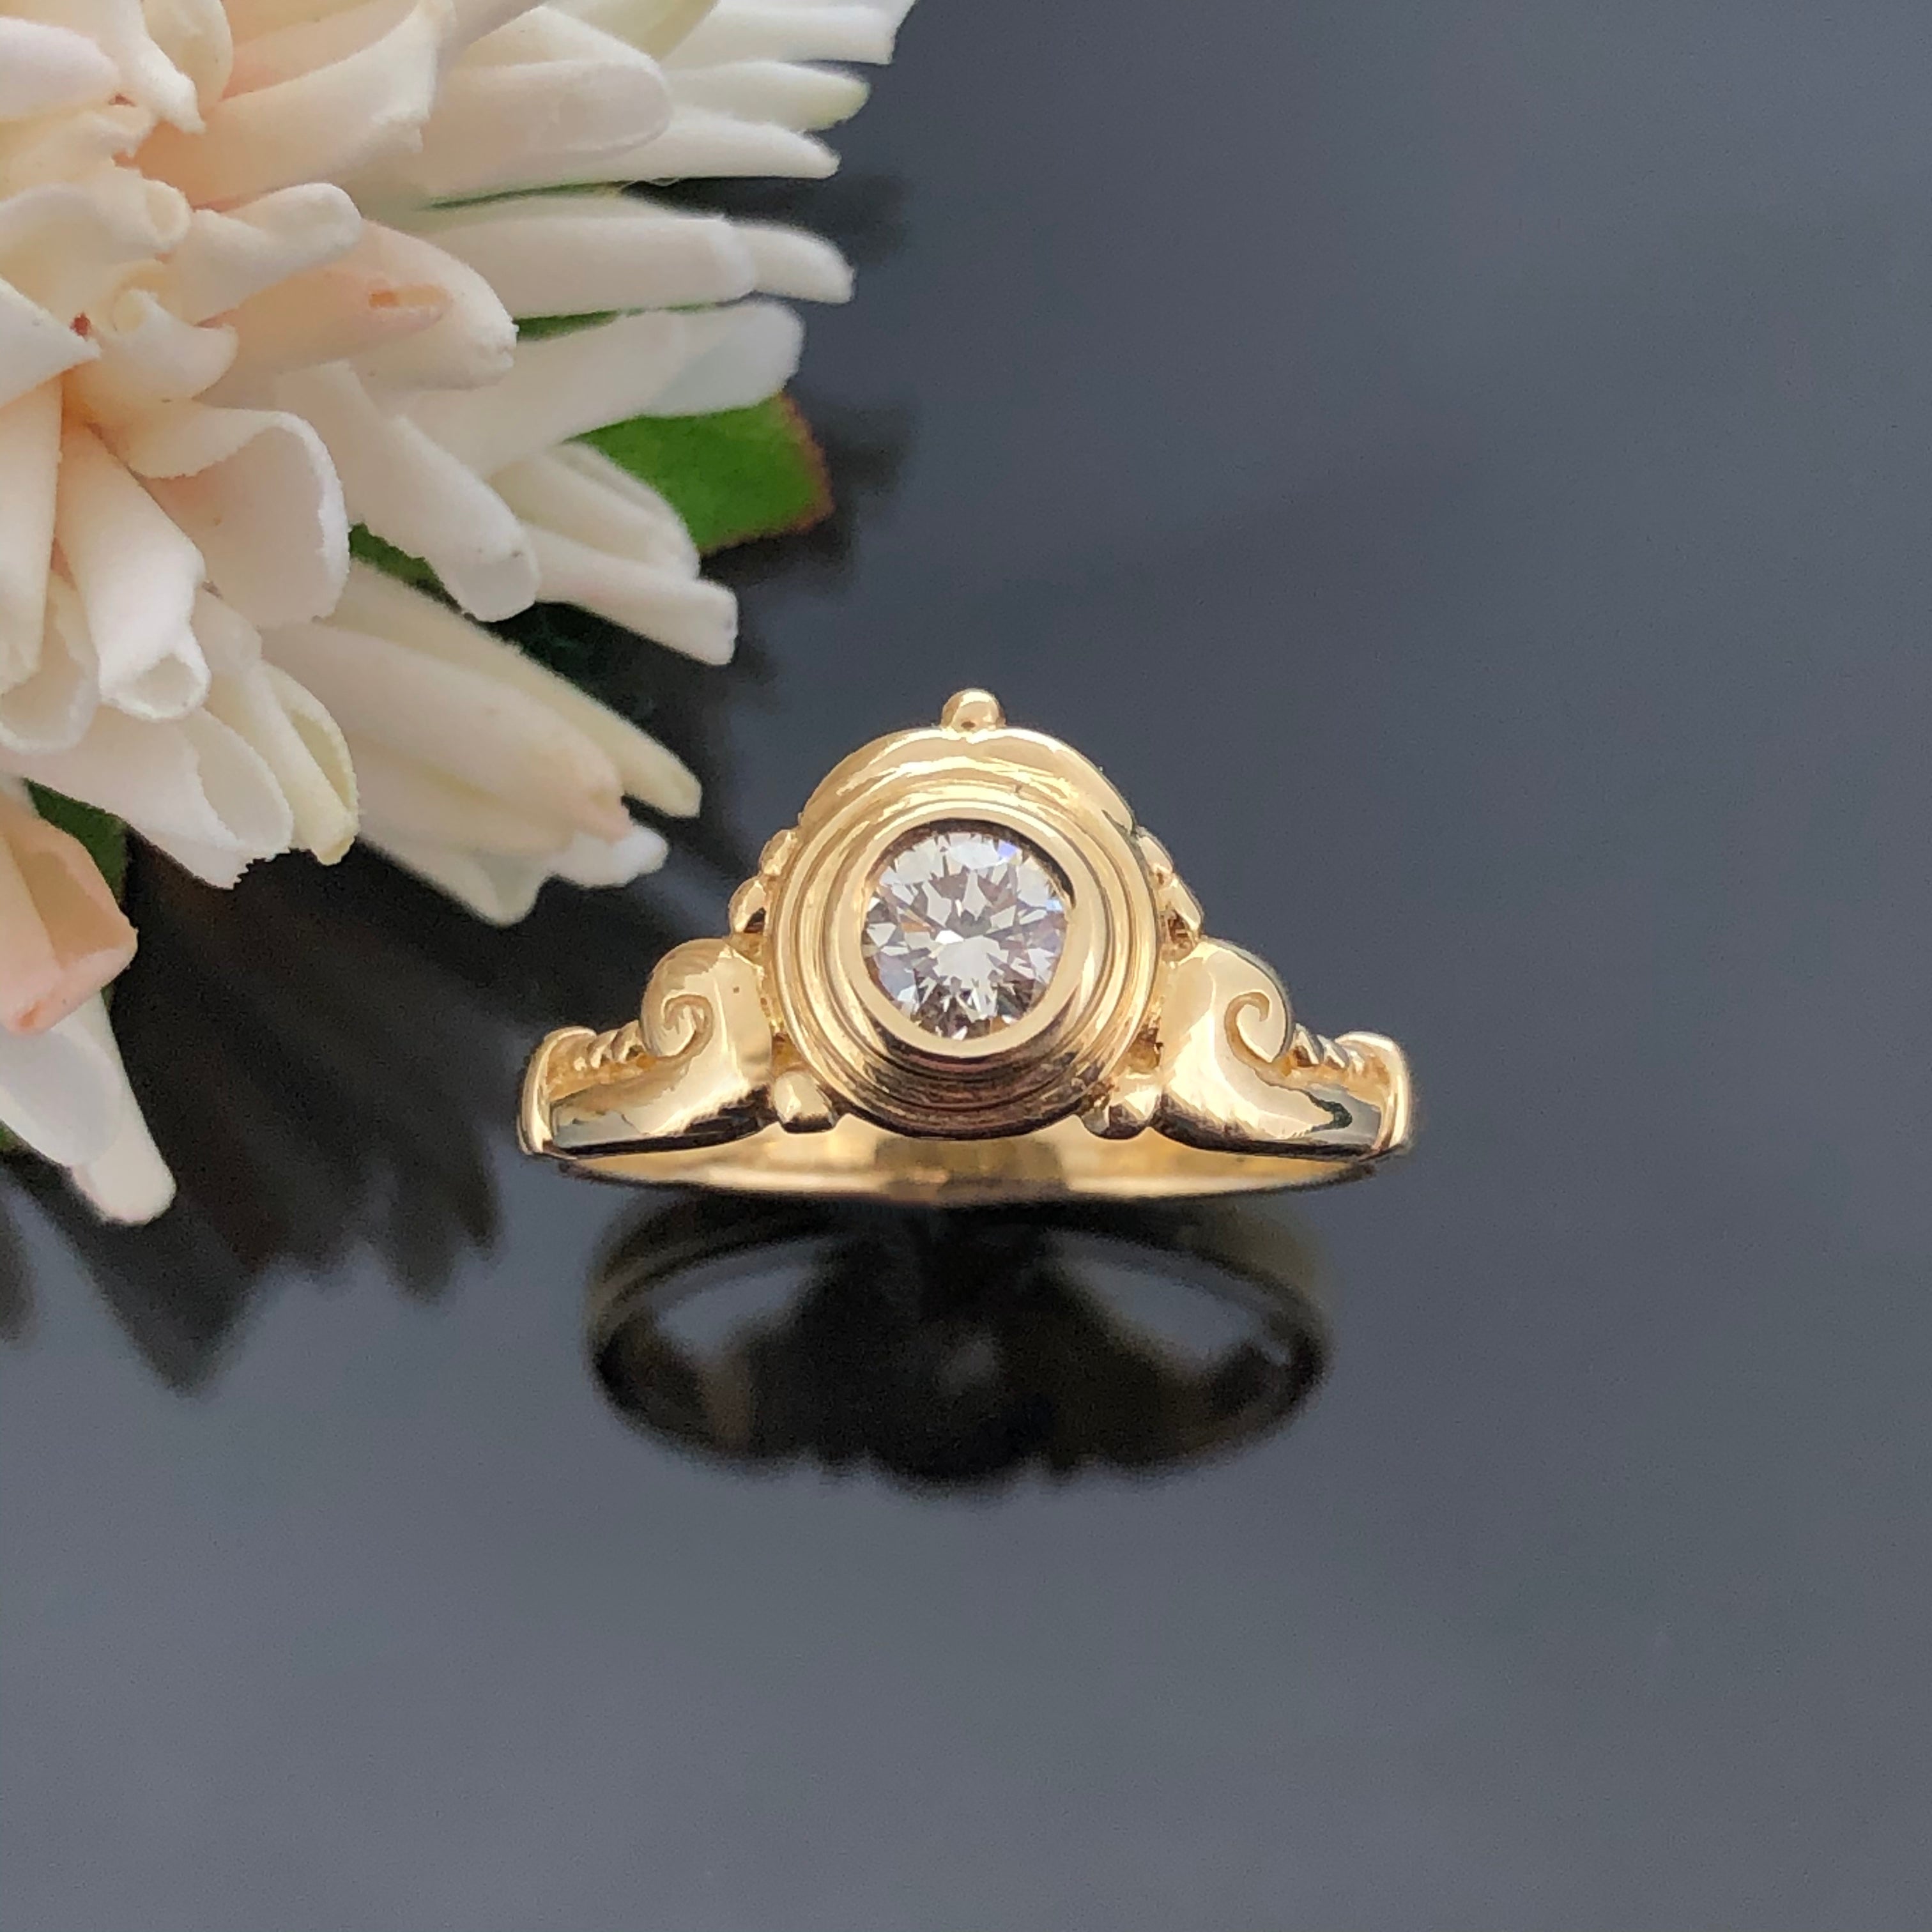 18ct Gold & Sapphire Ring by Cartier (196U) | The Antique Jewellery Company